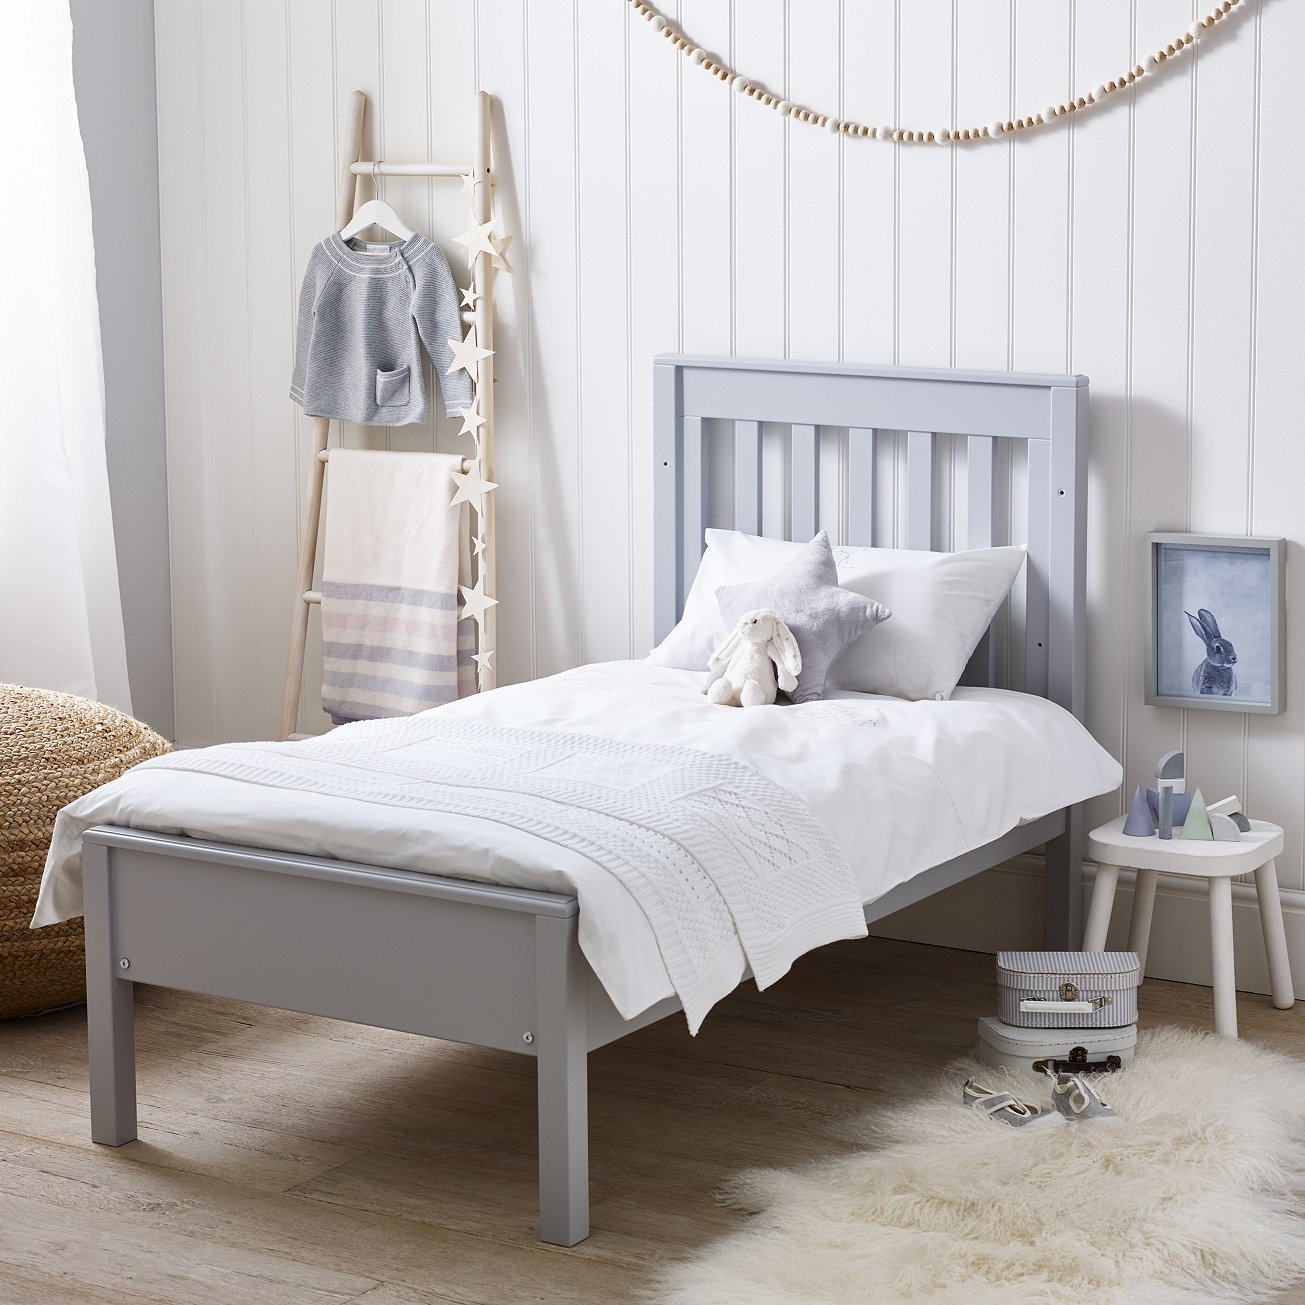 The rich birch bed is THE only early years bed that you will need. When you baby is small the cot will house them with ease. As they start to get older the cot can then be converted into a junior bed and the mattress can be lowered. This means that you do not need to fork out on another bed in their first few years. - £425.00